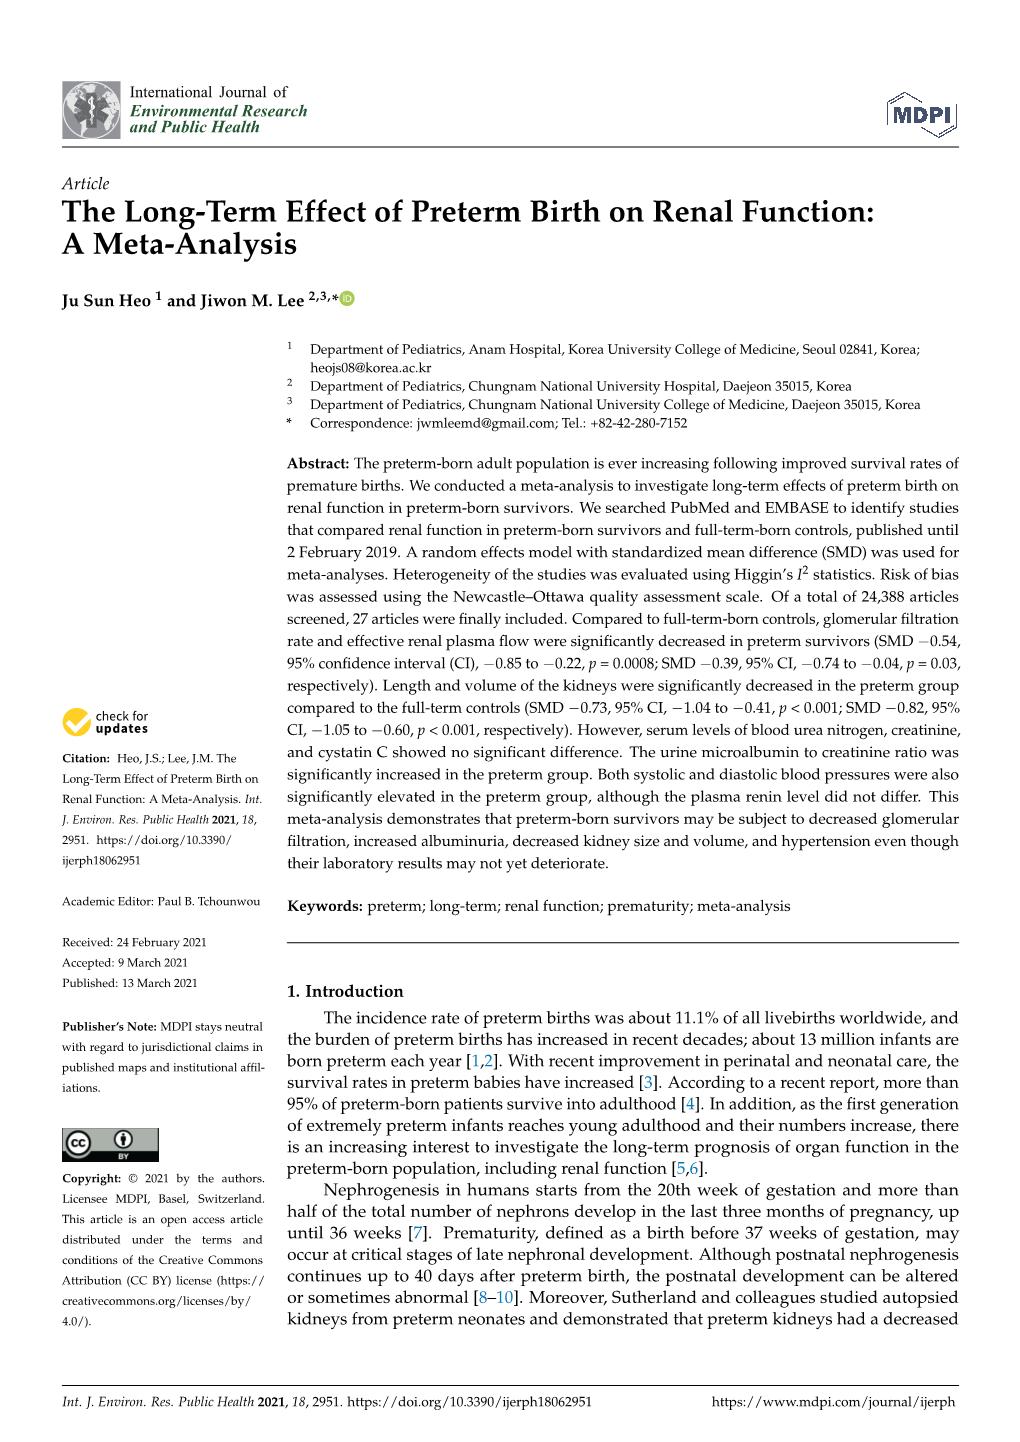 The Long-Term Effect of Preterm Birth on Renal Function: a Meta-Analysis